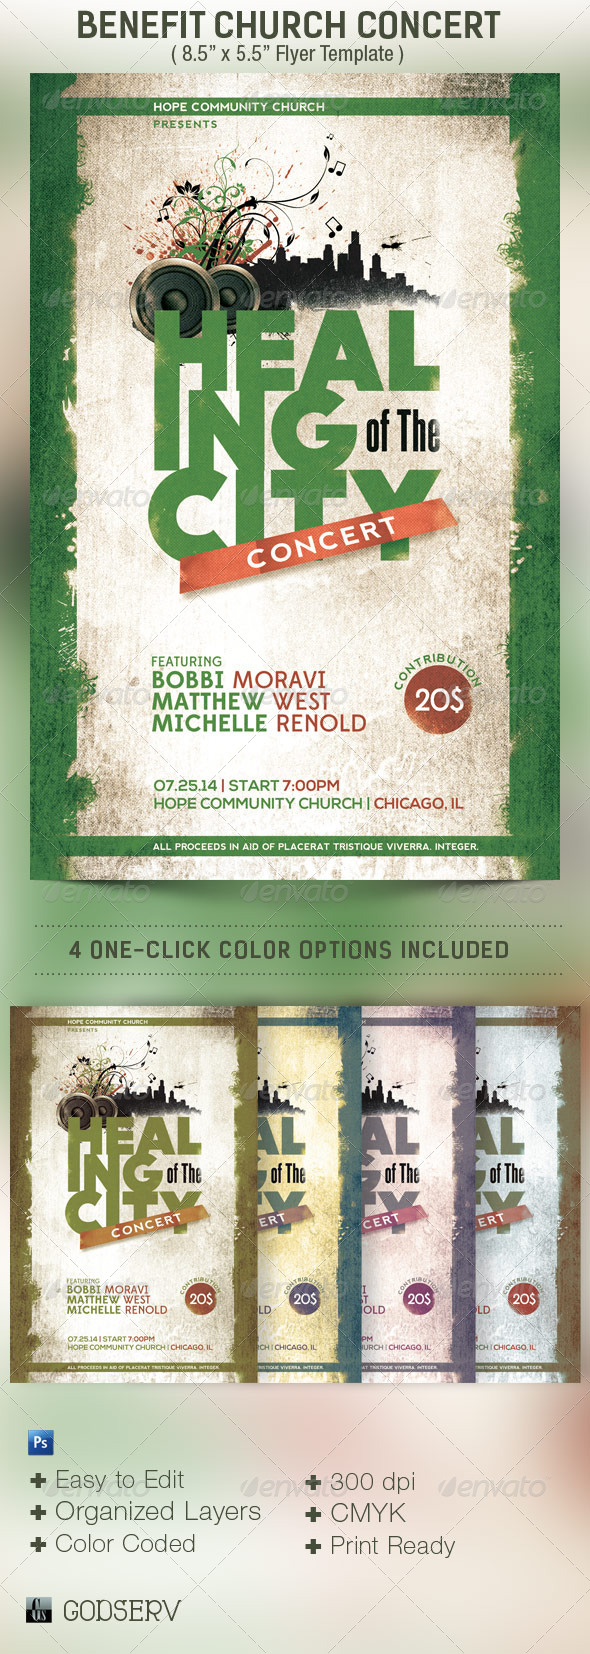 Benefit-Concert-Flyer-Template-Preview